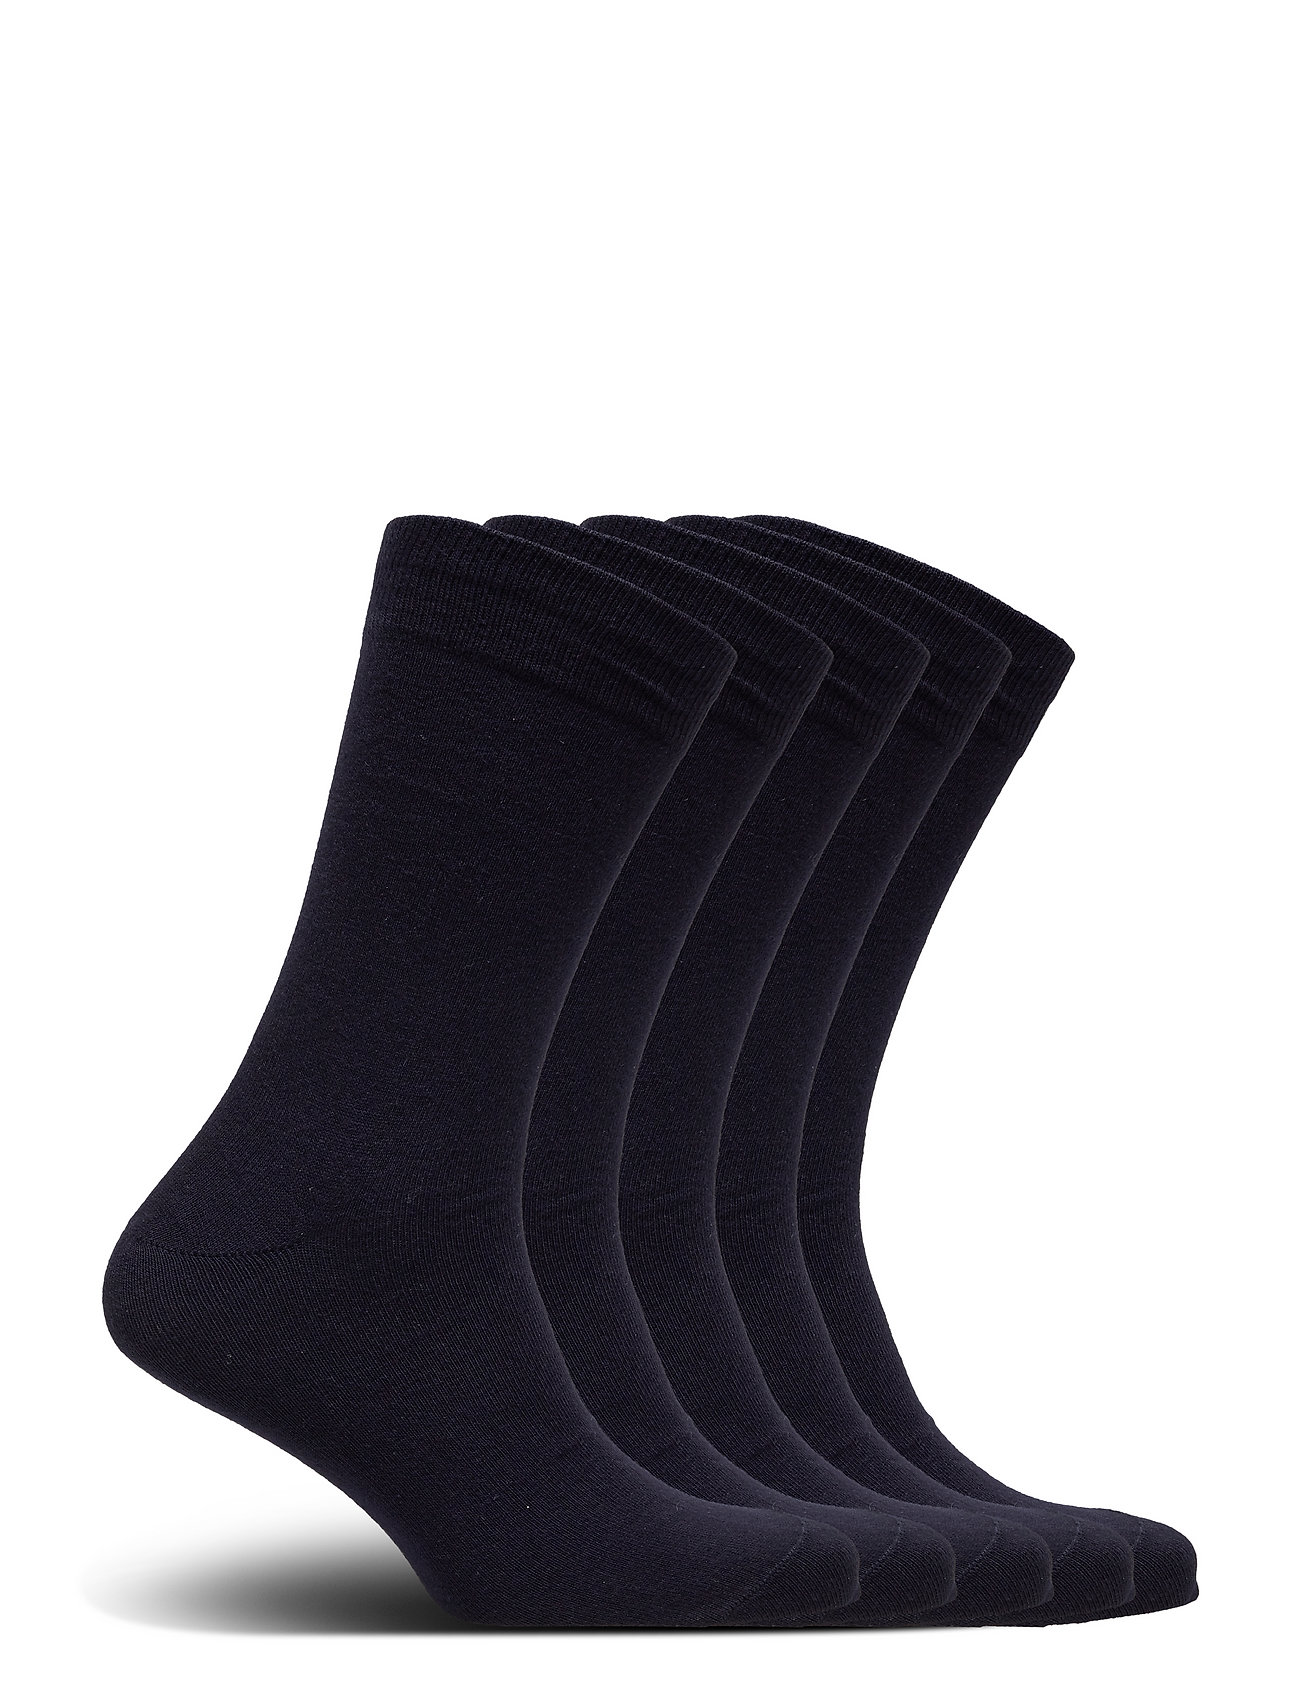 Dovre - Dovre sock cotton 5-pack - lowest prices - navy - 1